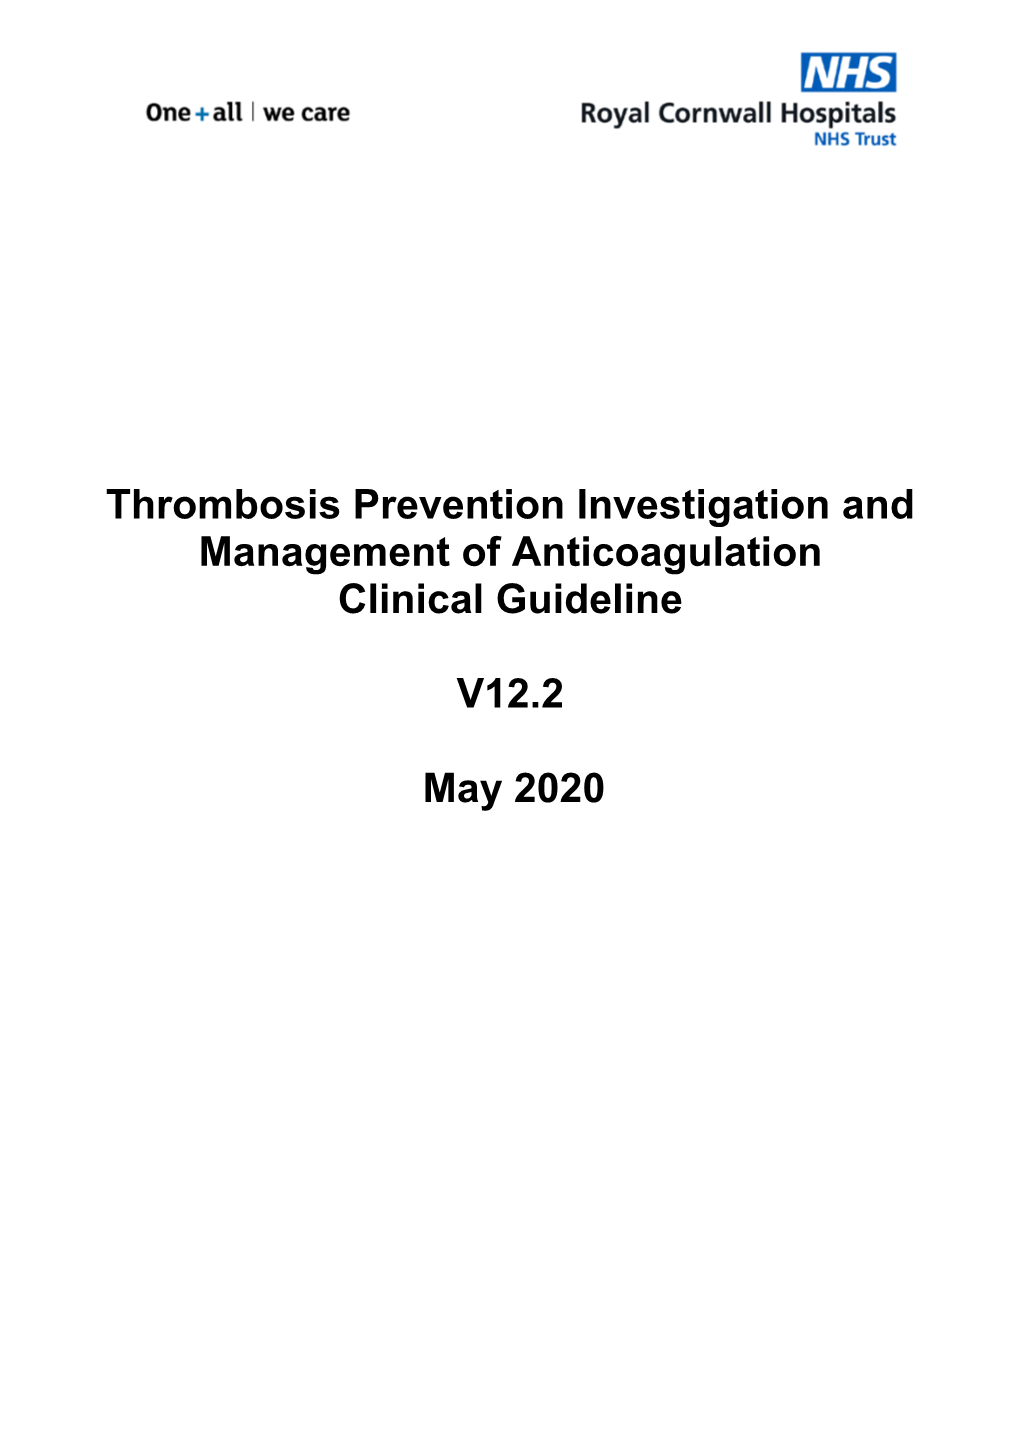 Thrombosis Prevention Investigation and Management of Anticoagulation Clinical Guideline